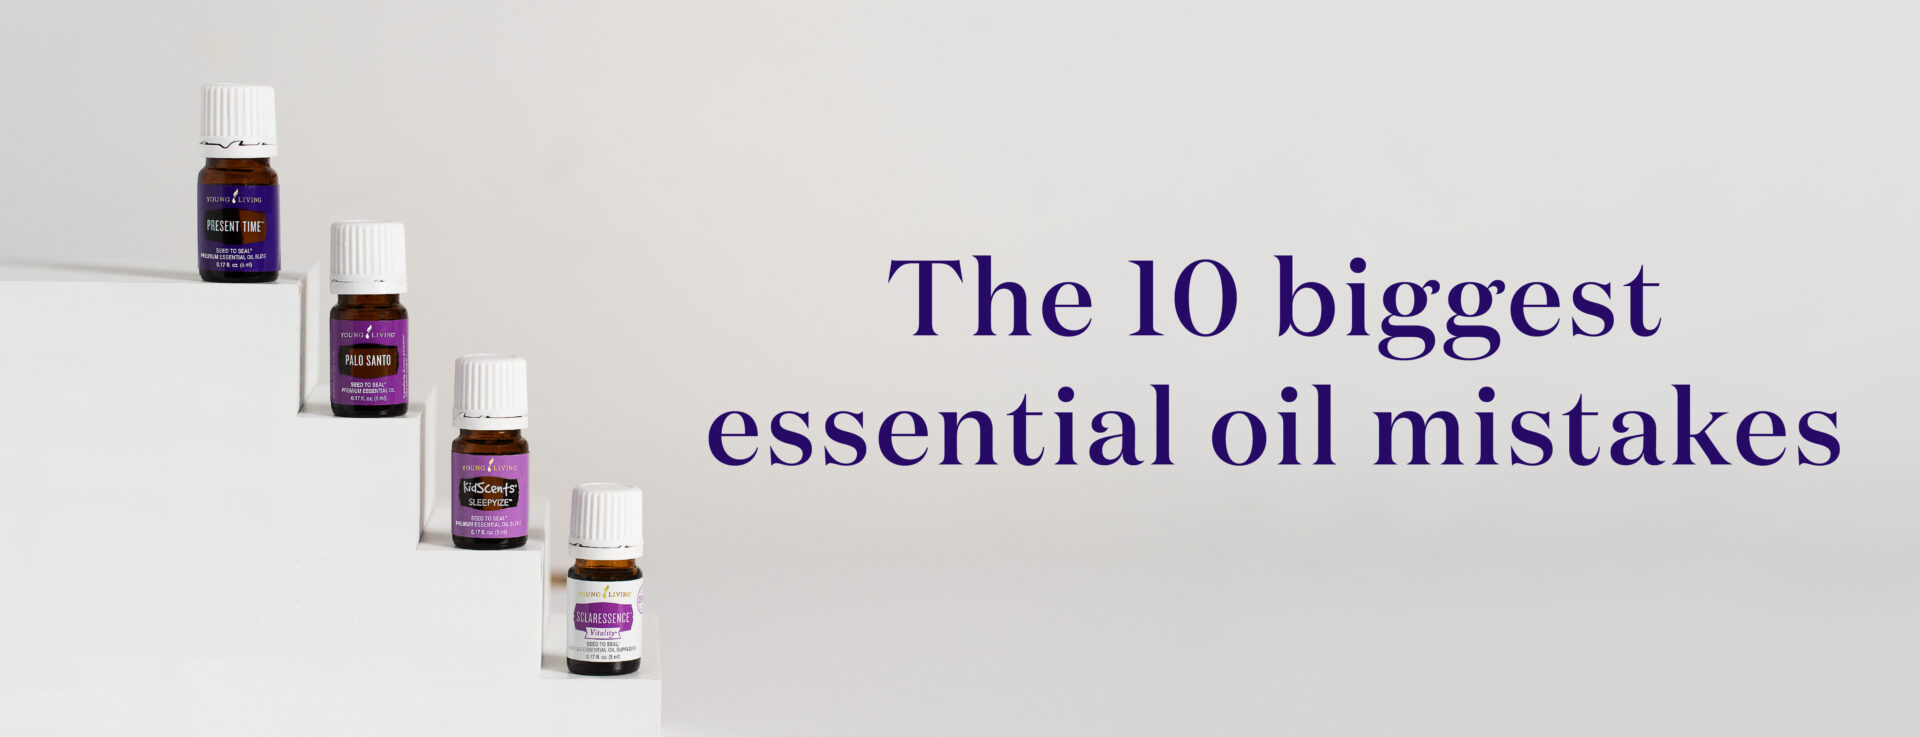 10 biggest essential oil mistakes - Young Living Lavender Life Blog